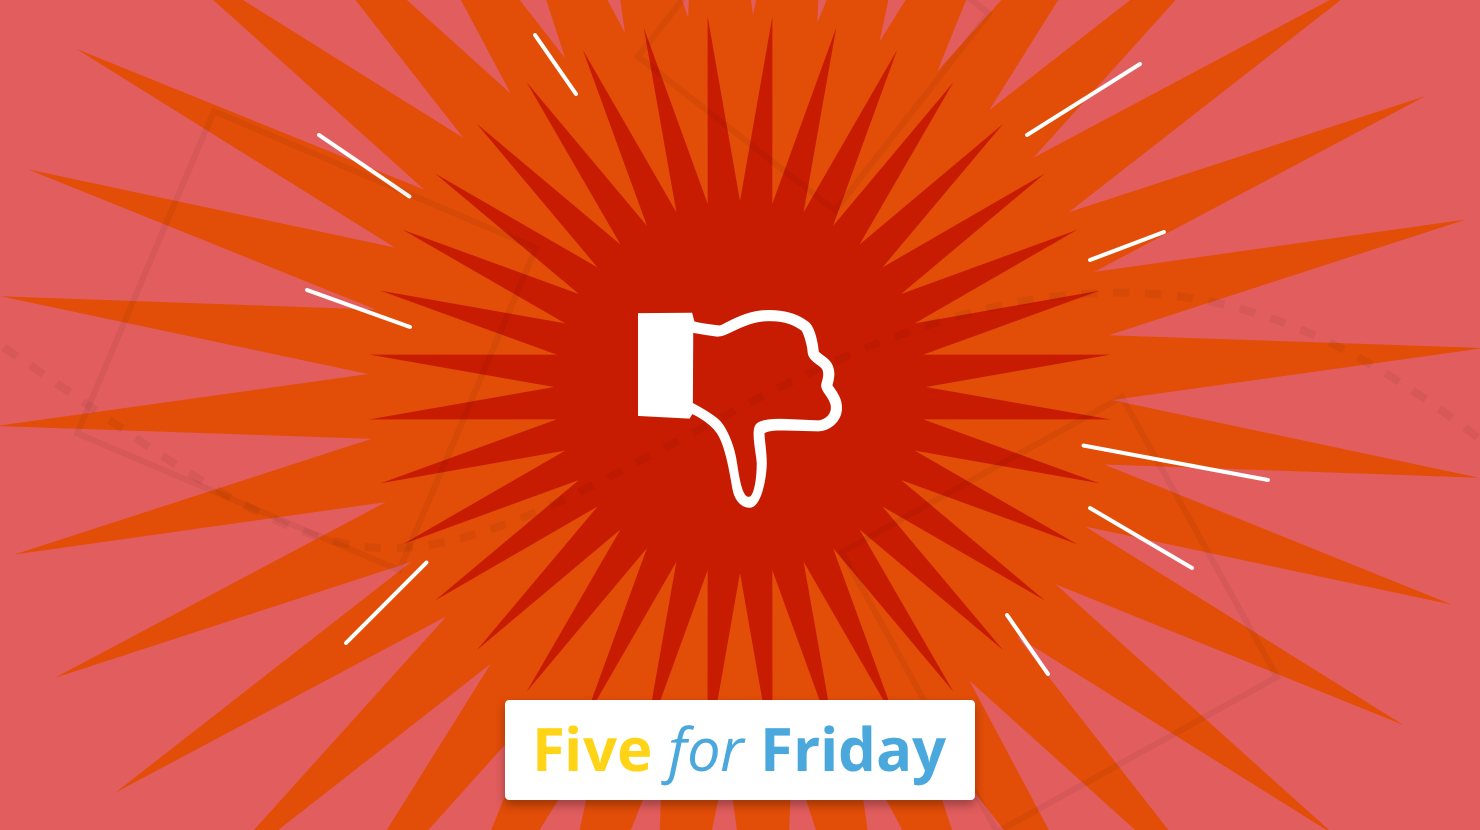 Five for Friday: Rudeness at work